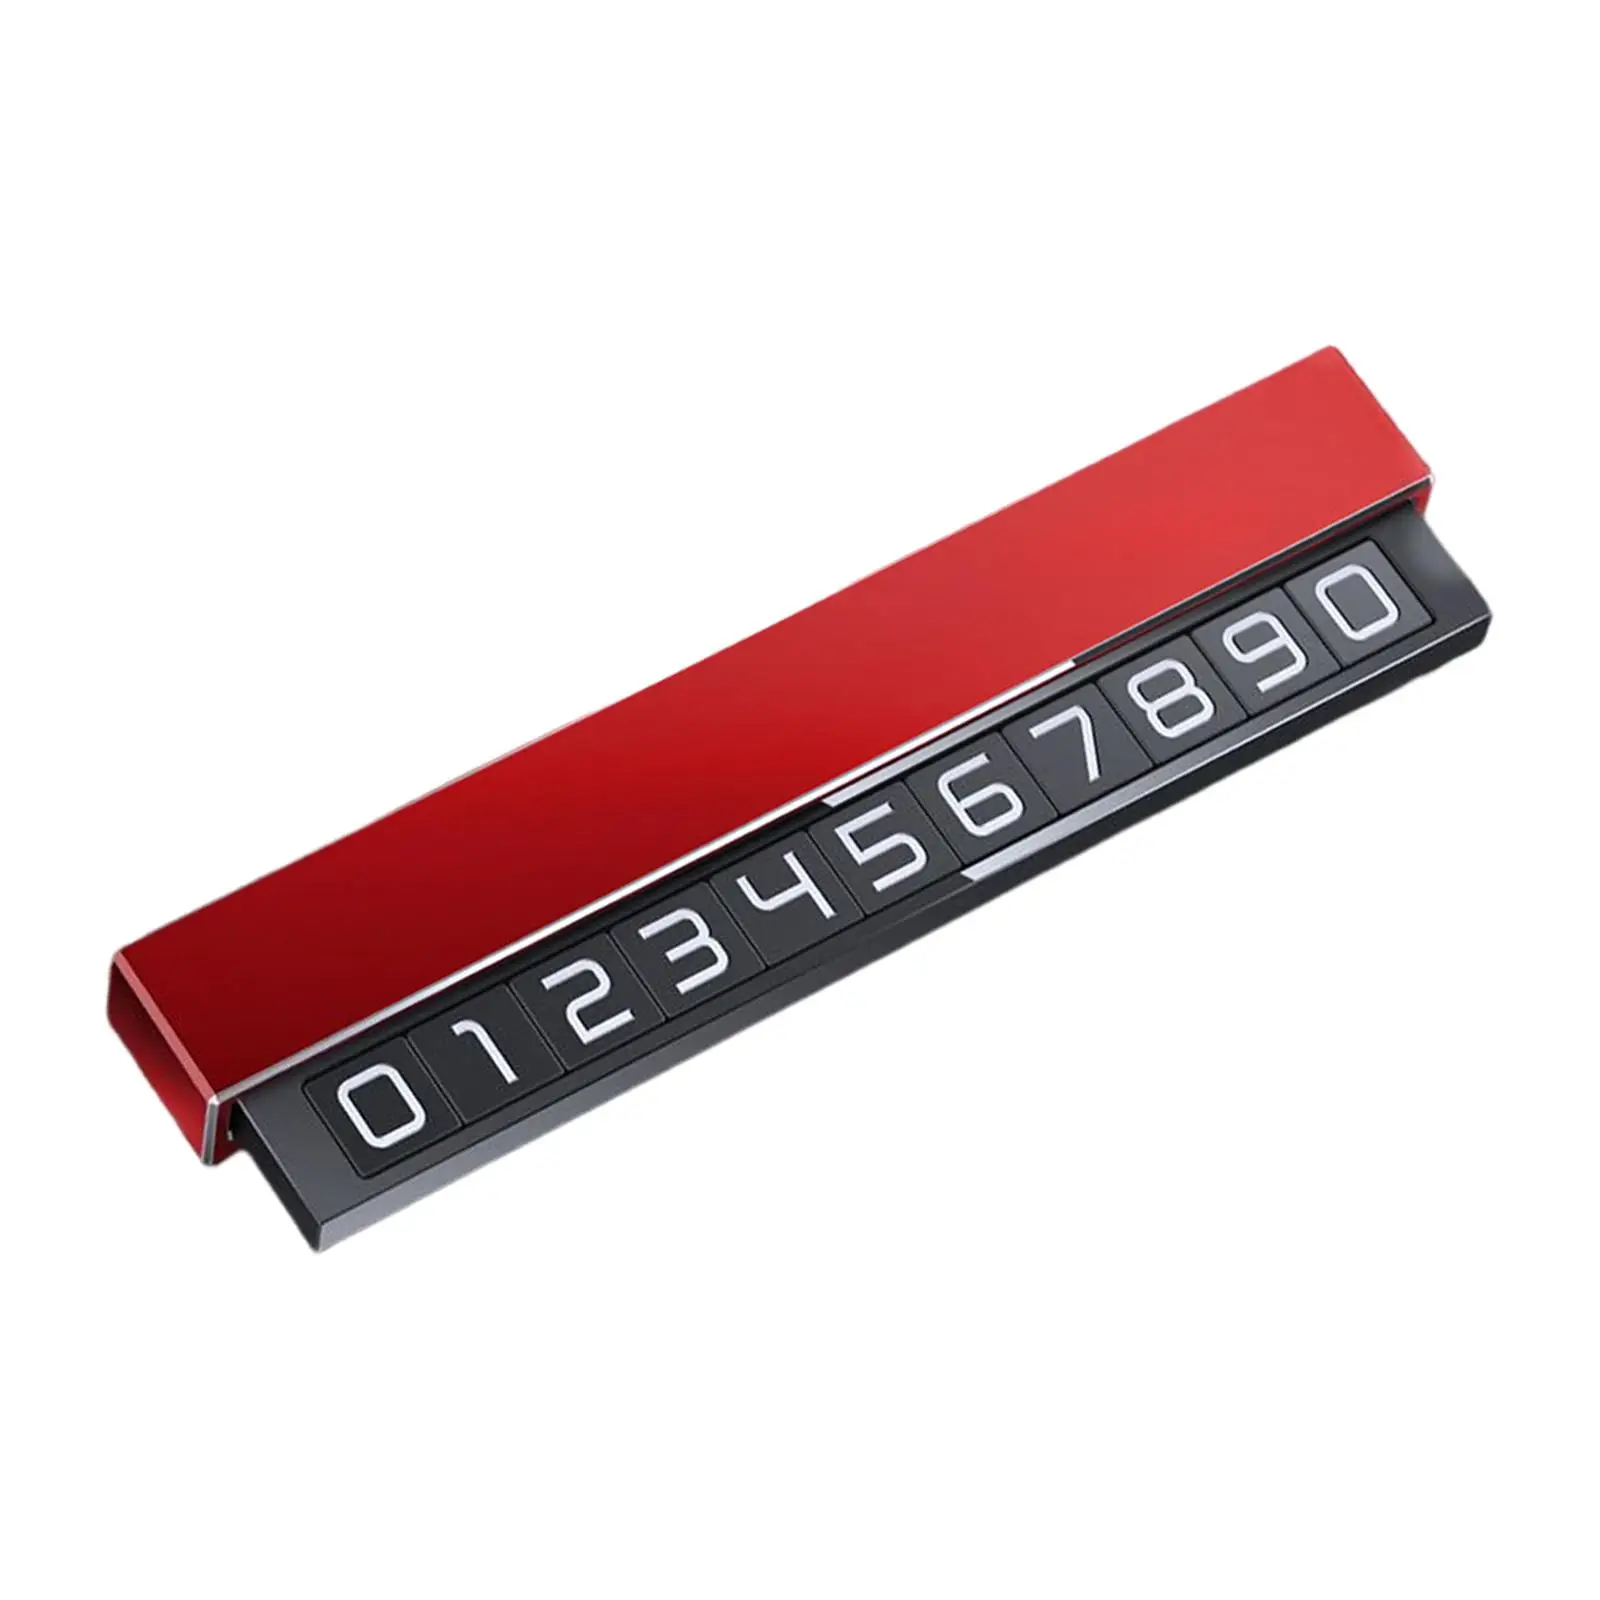 Automobile Parking Number Sign Creative Car Styling Parts for Parking